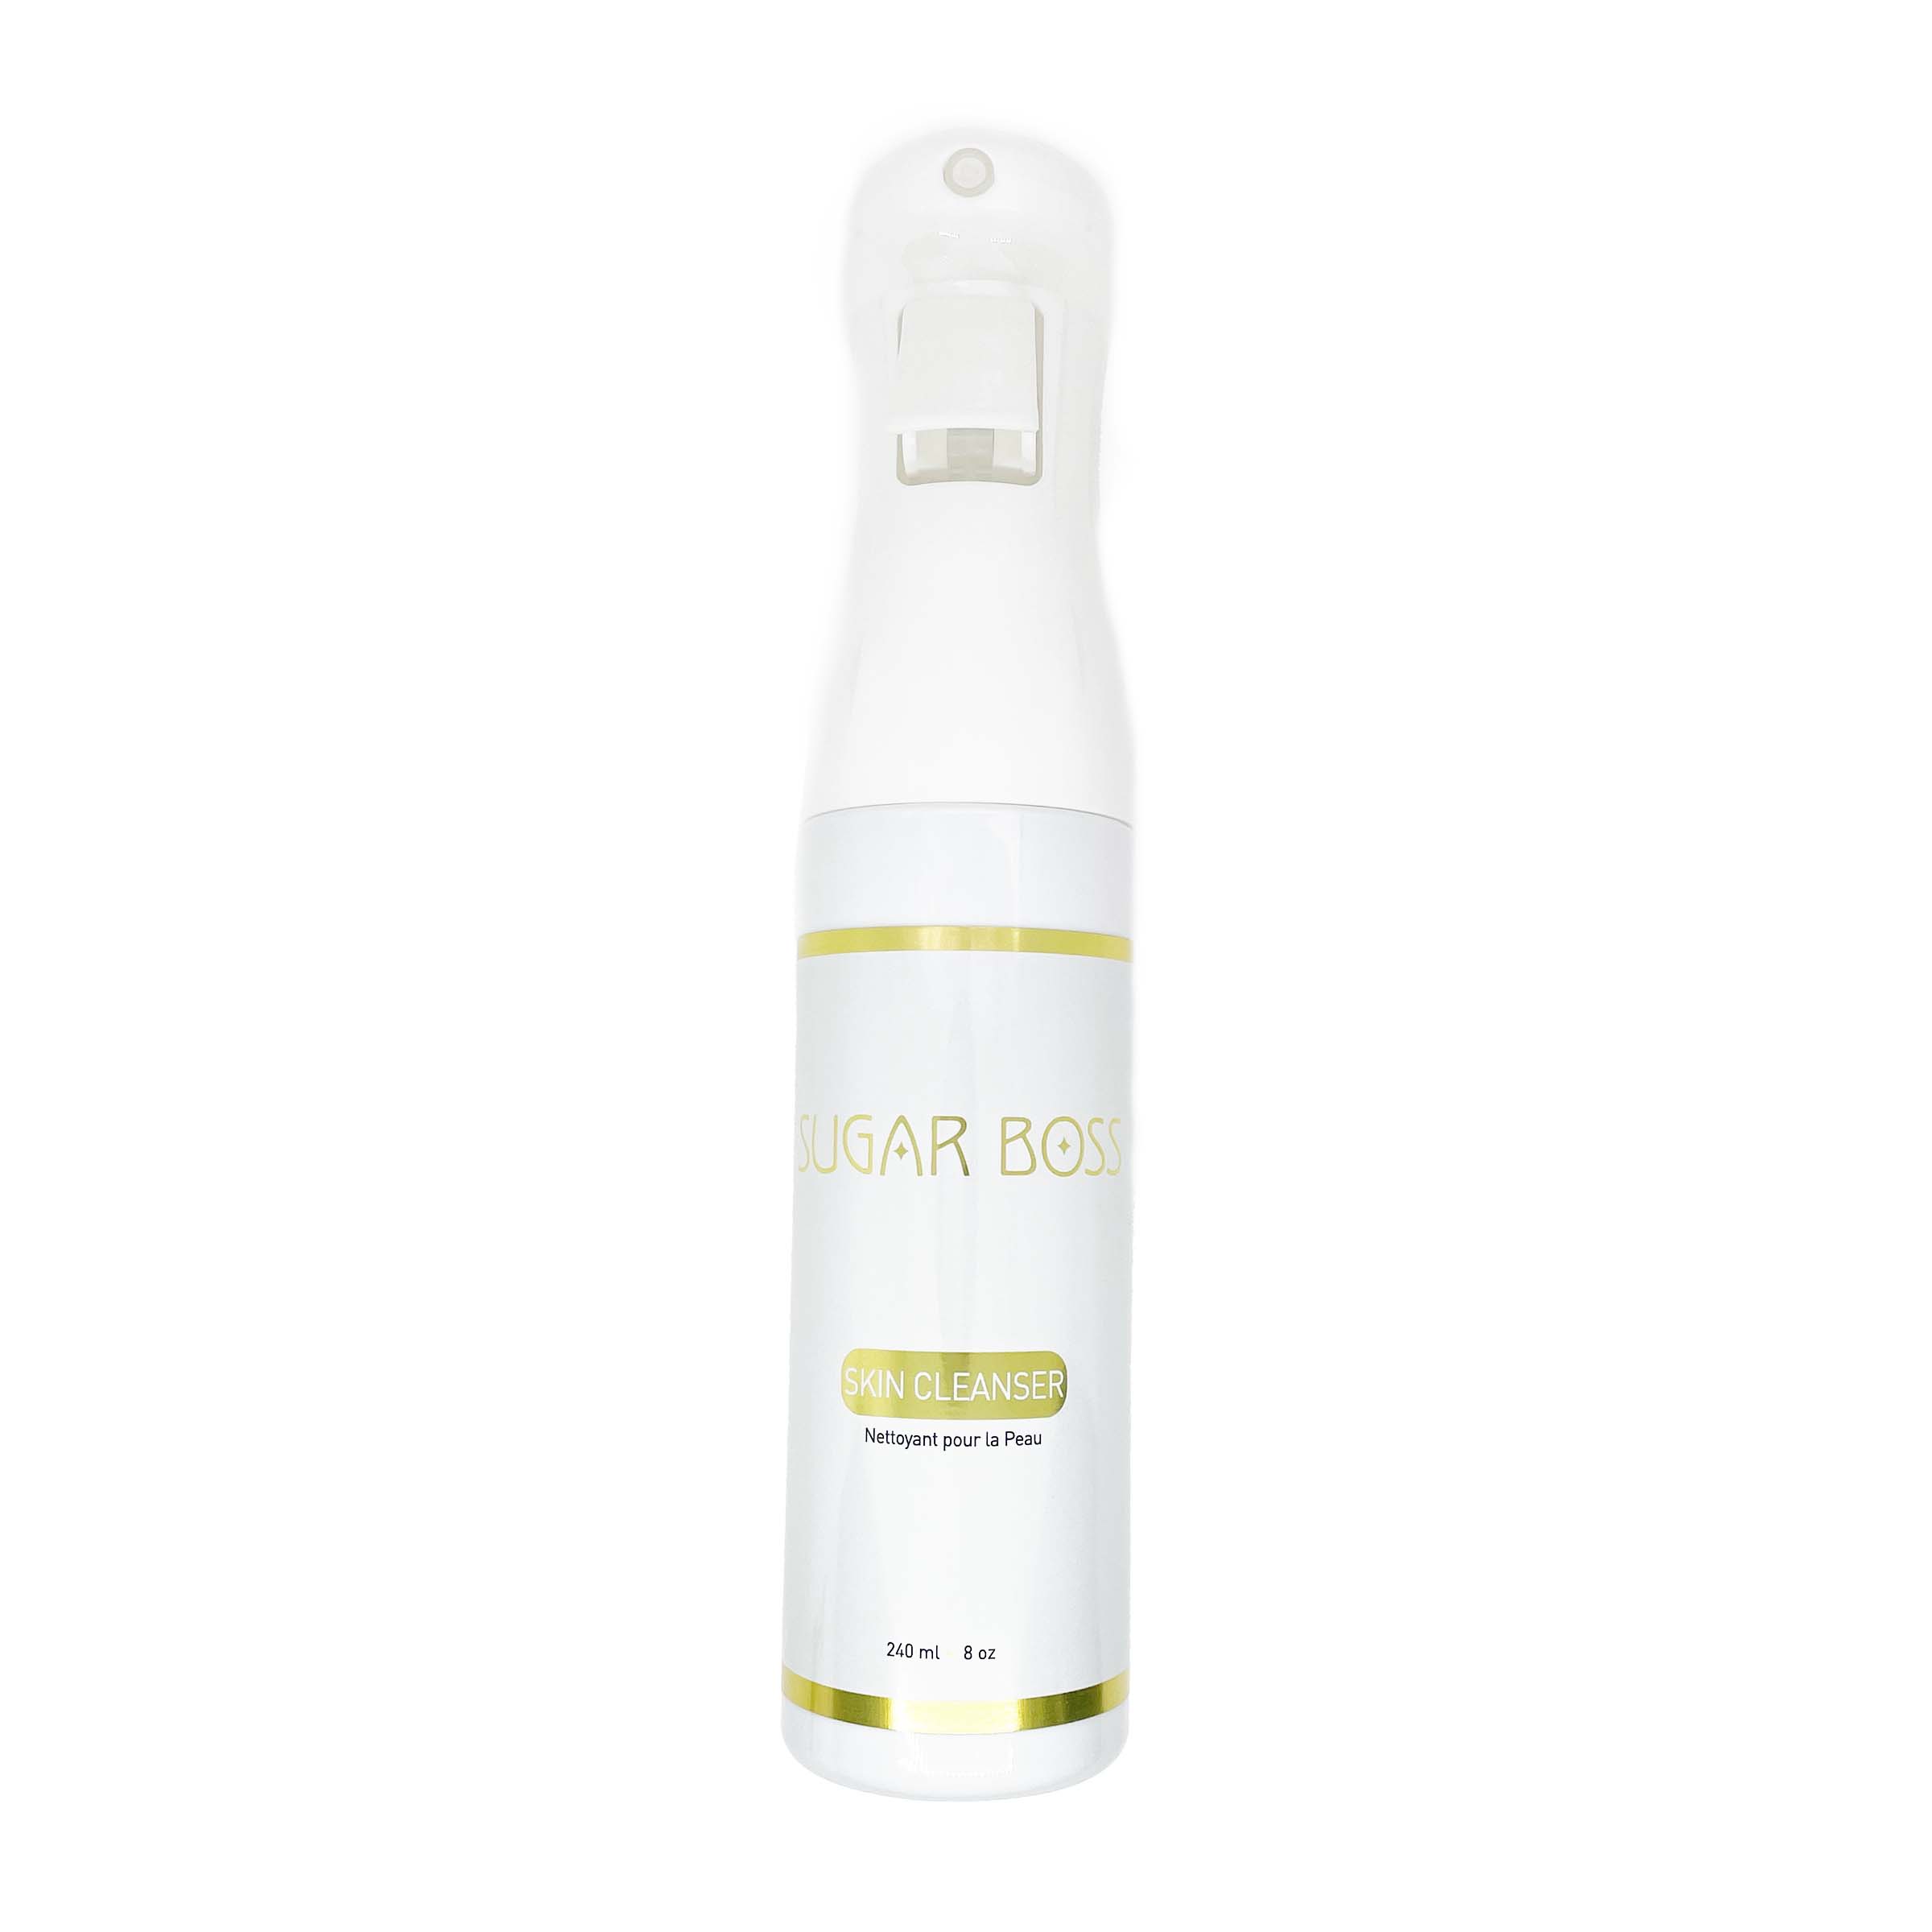 Sugar Boss - Skin Cleanser with Mister Spray Nozzle - Creata Beauty - Professional Beauty Products